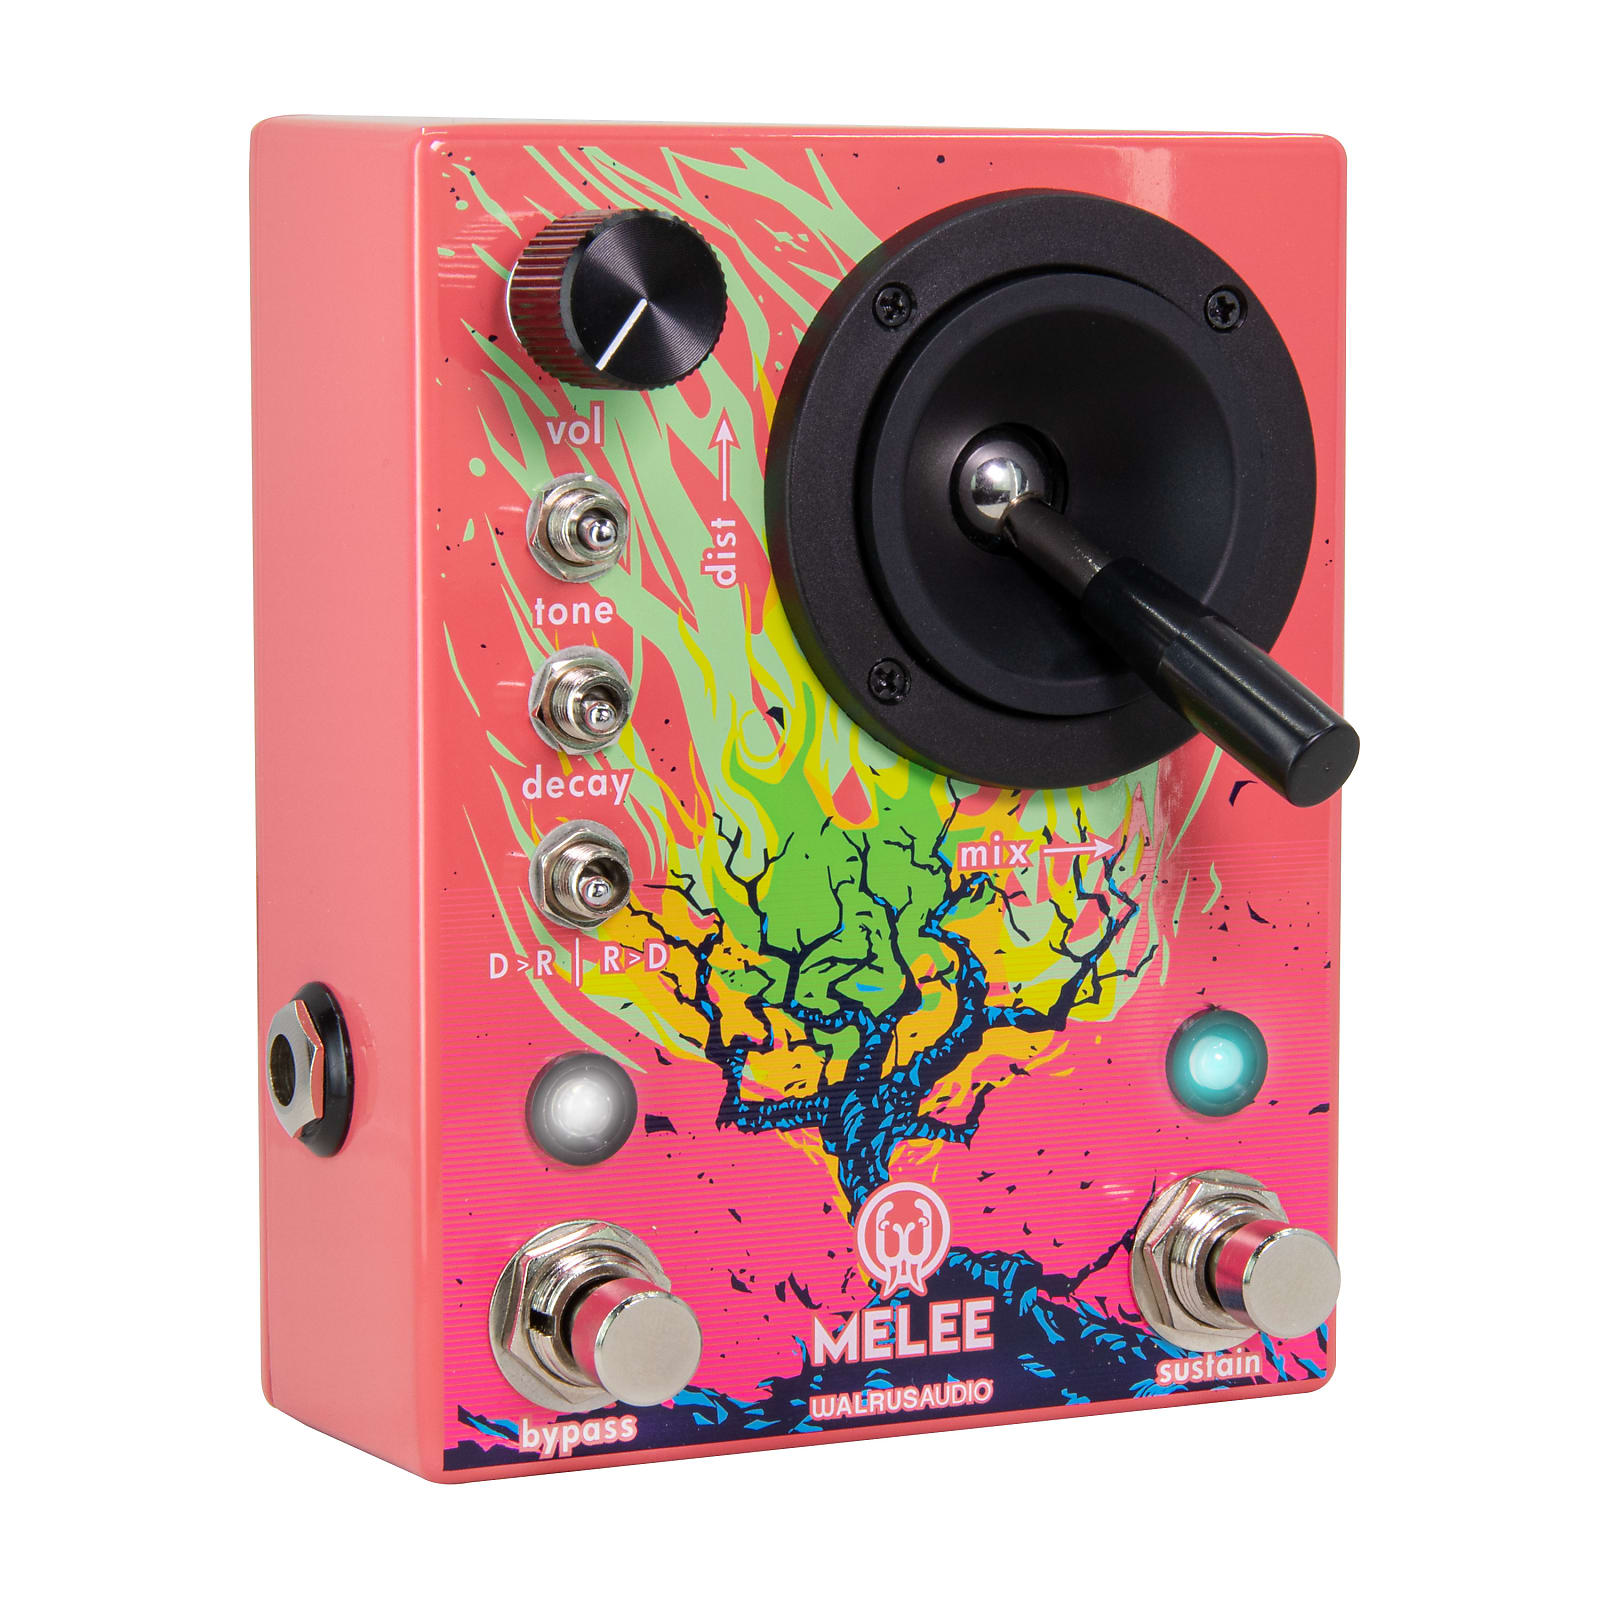 Walrus Audio Melee Wall of Noise Distortion / Reverb Effects Pedal